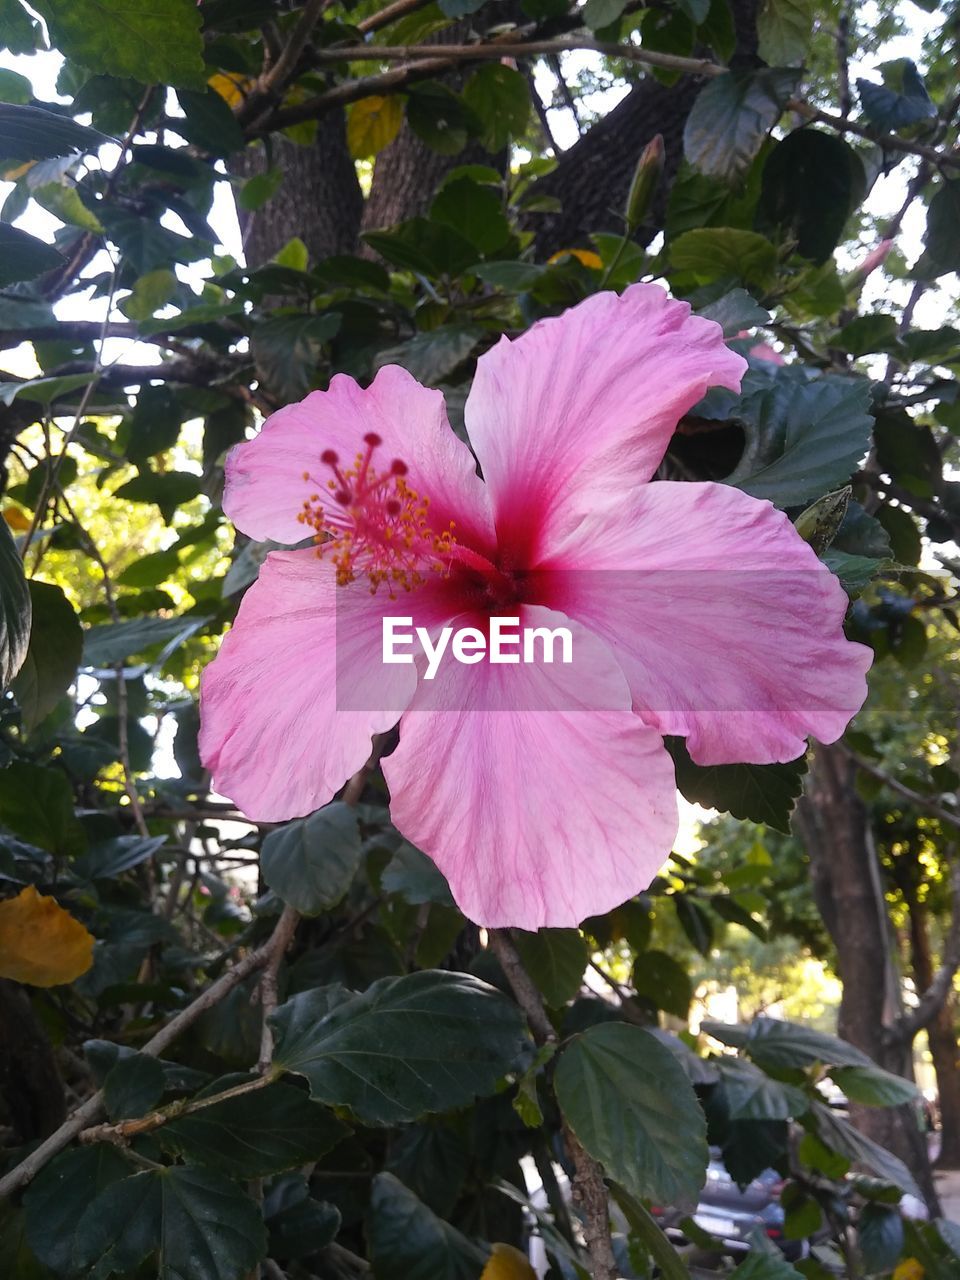 CLOSE-UP OF PINK HIBISCUS BLOOMING AGAINST TREES